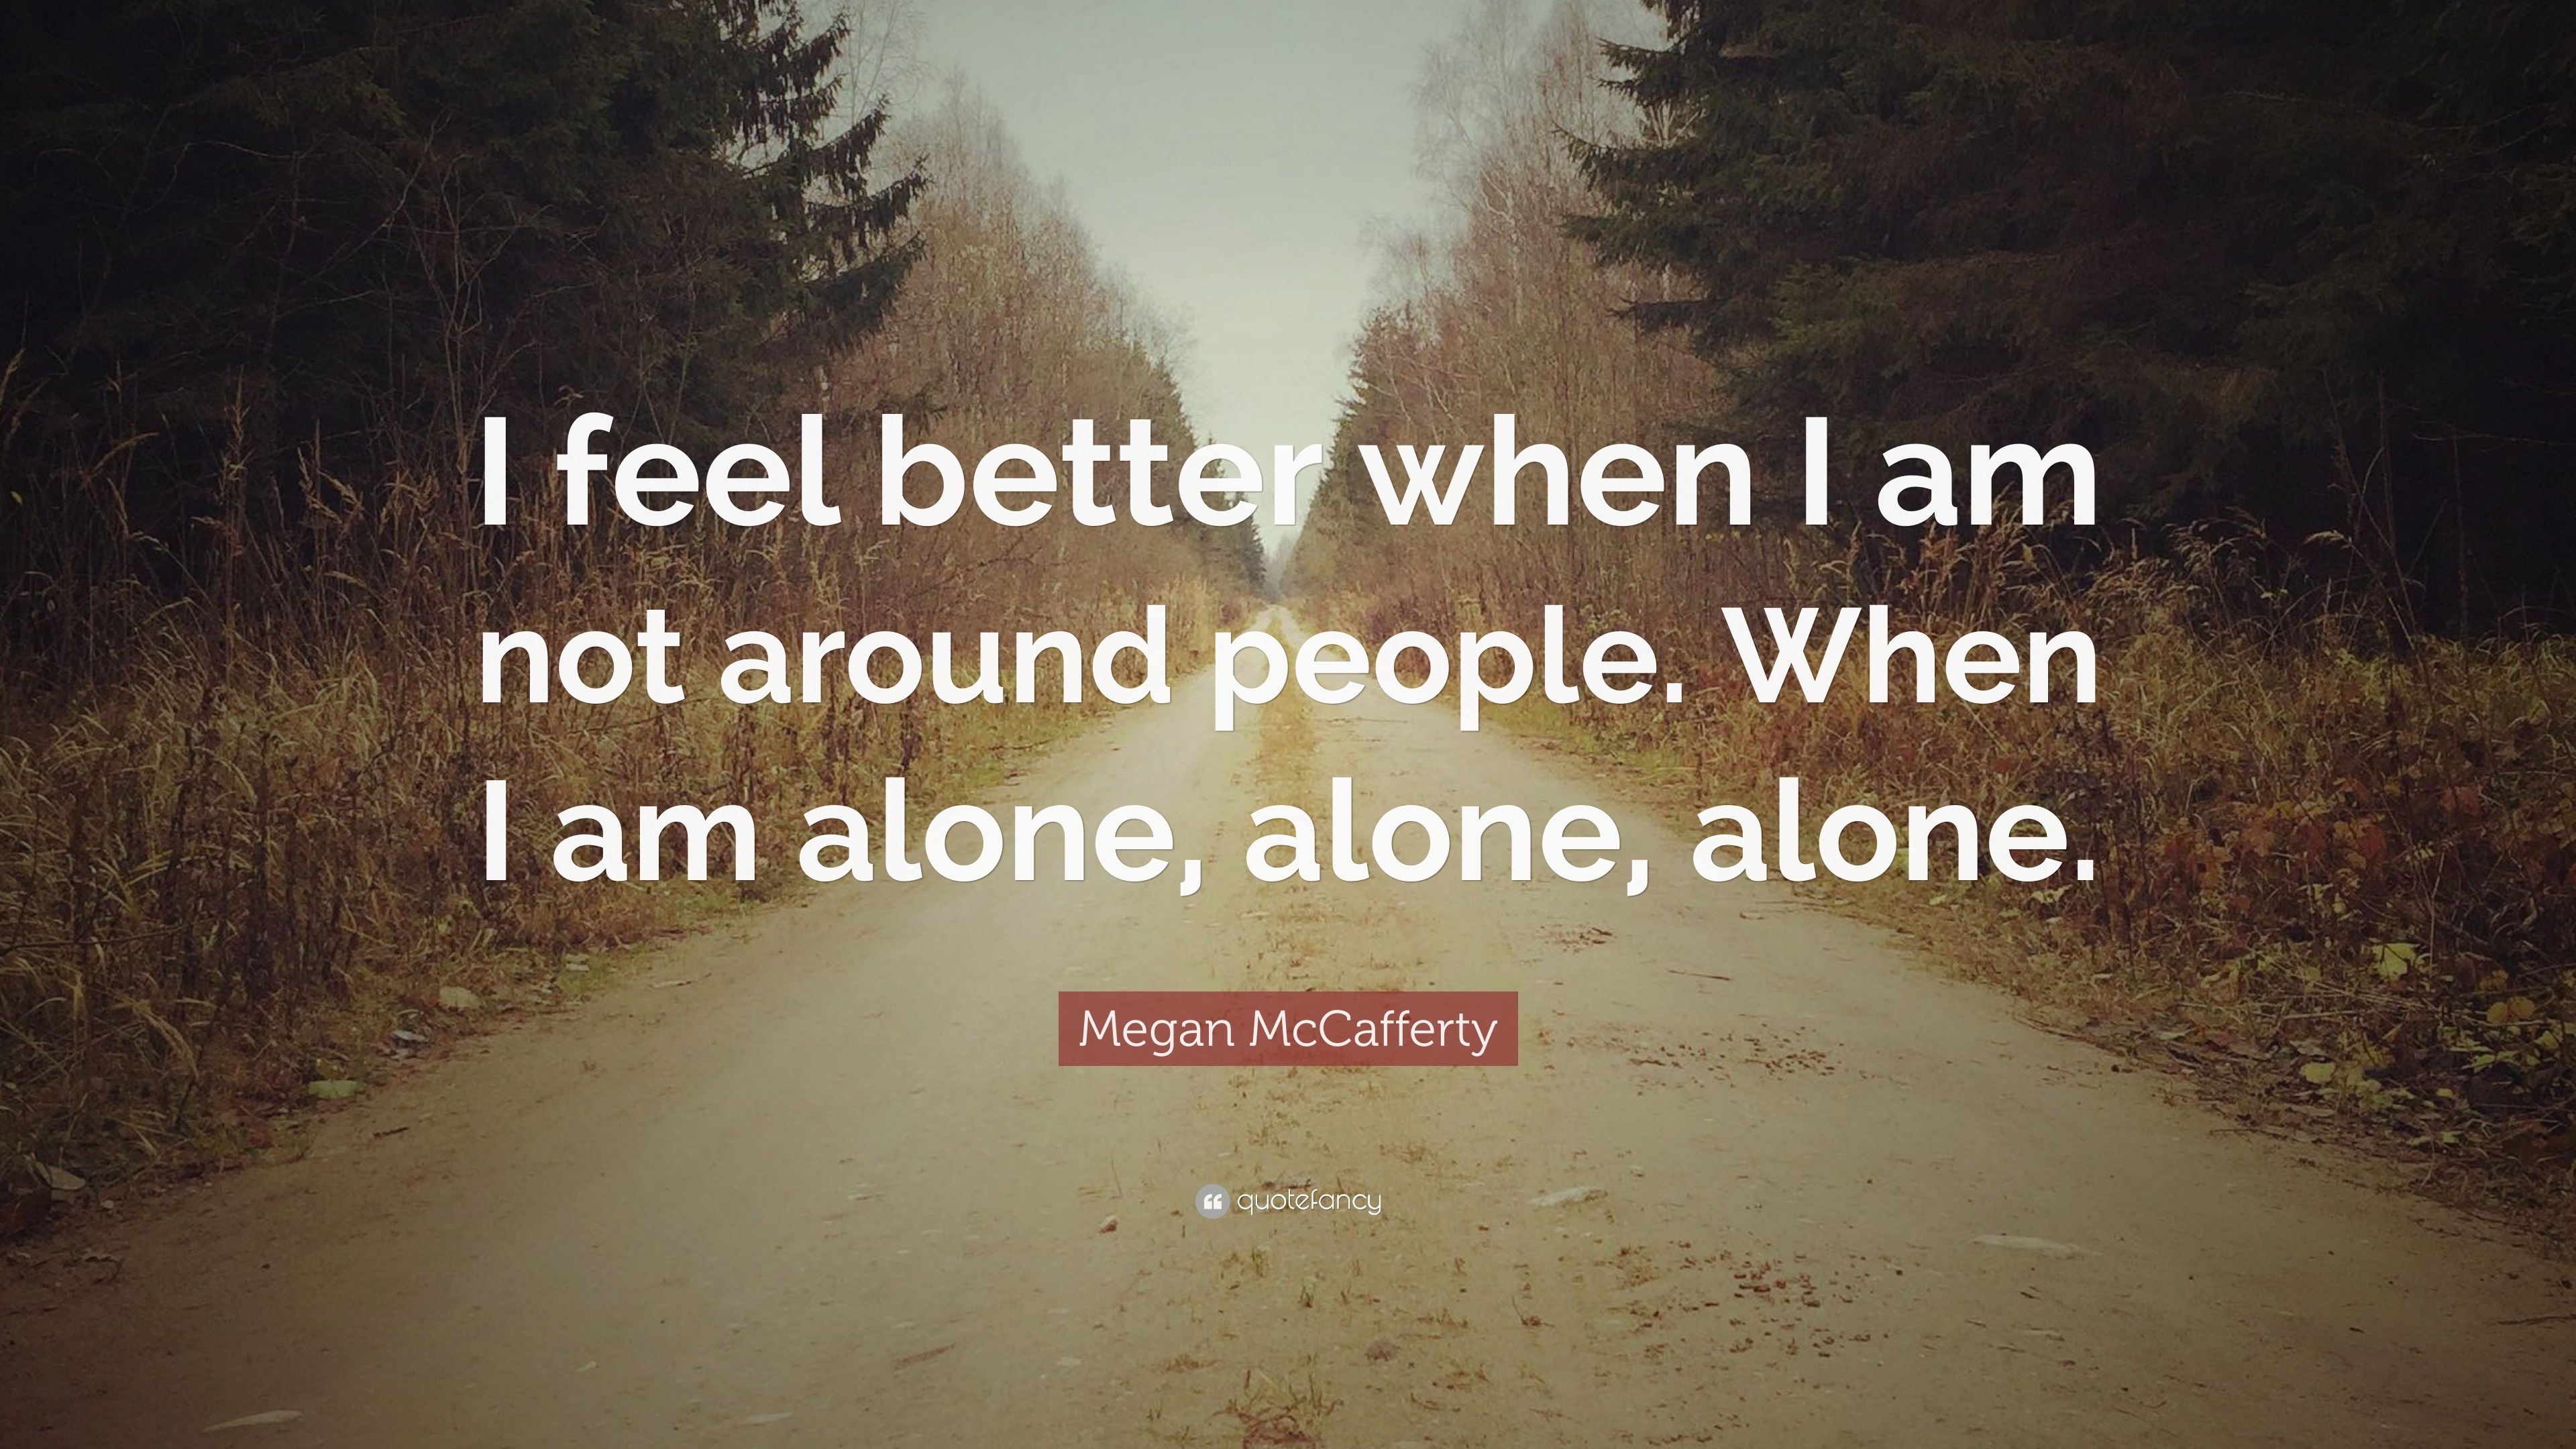 Megan McCafferty Quote: “I feel better when I am not around people ...